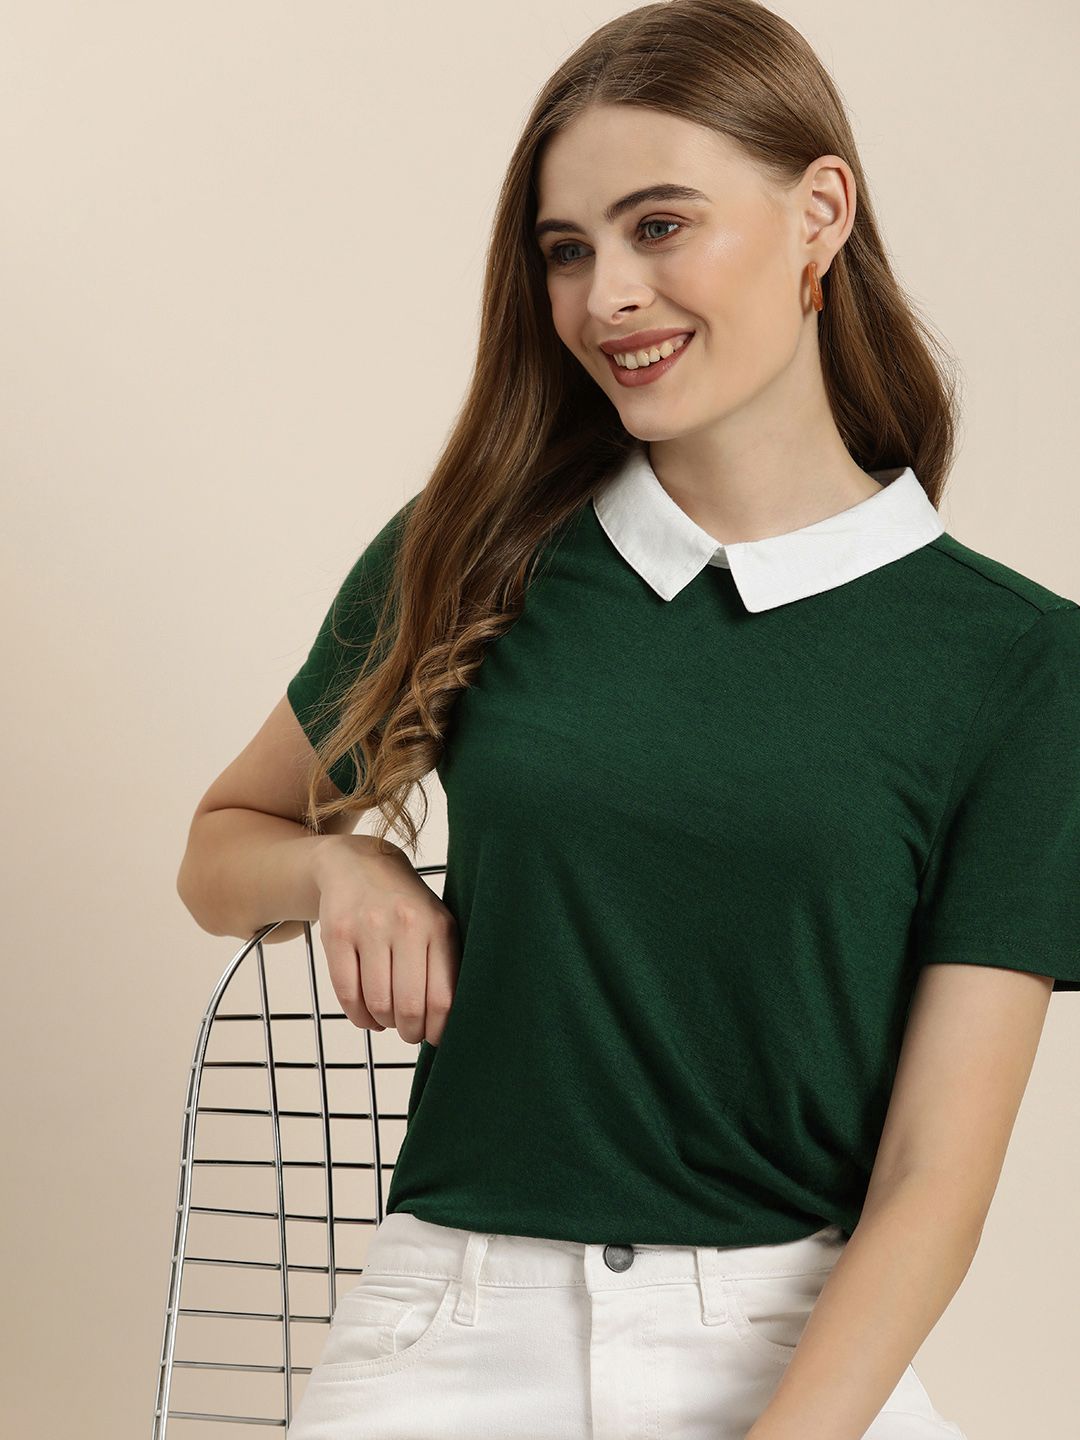 encore by INVICTUS Peter Pan Collar Top Price in India